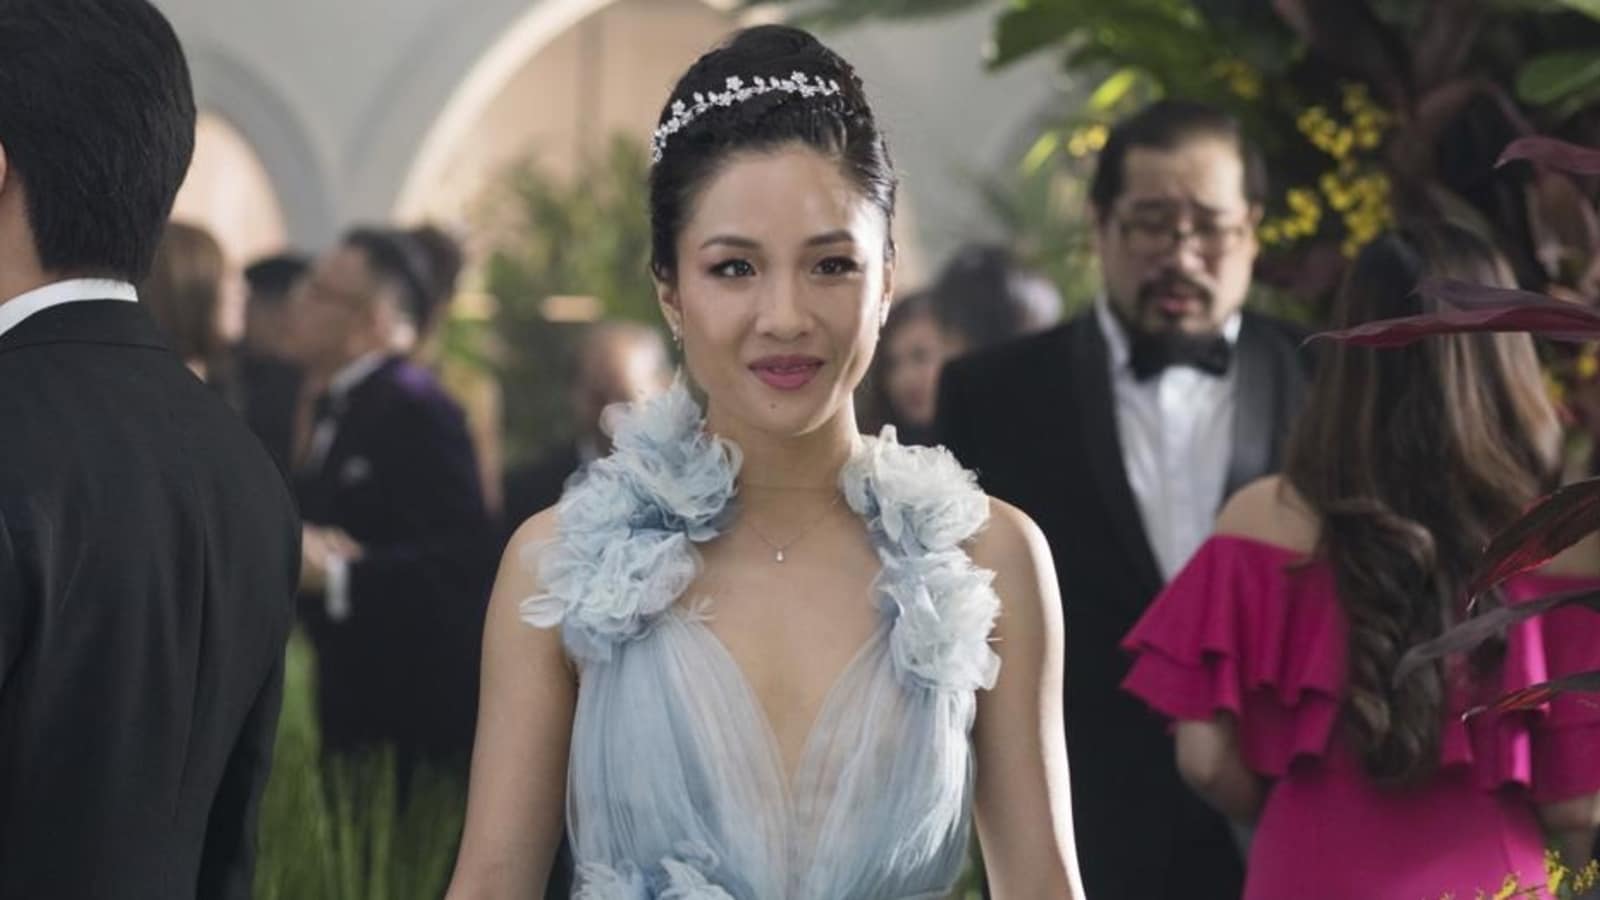 Crazy Rich Asians’ Constance Wu tried to end her life due to online trolling